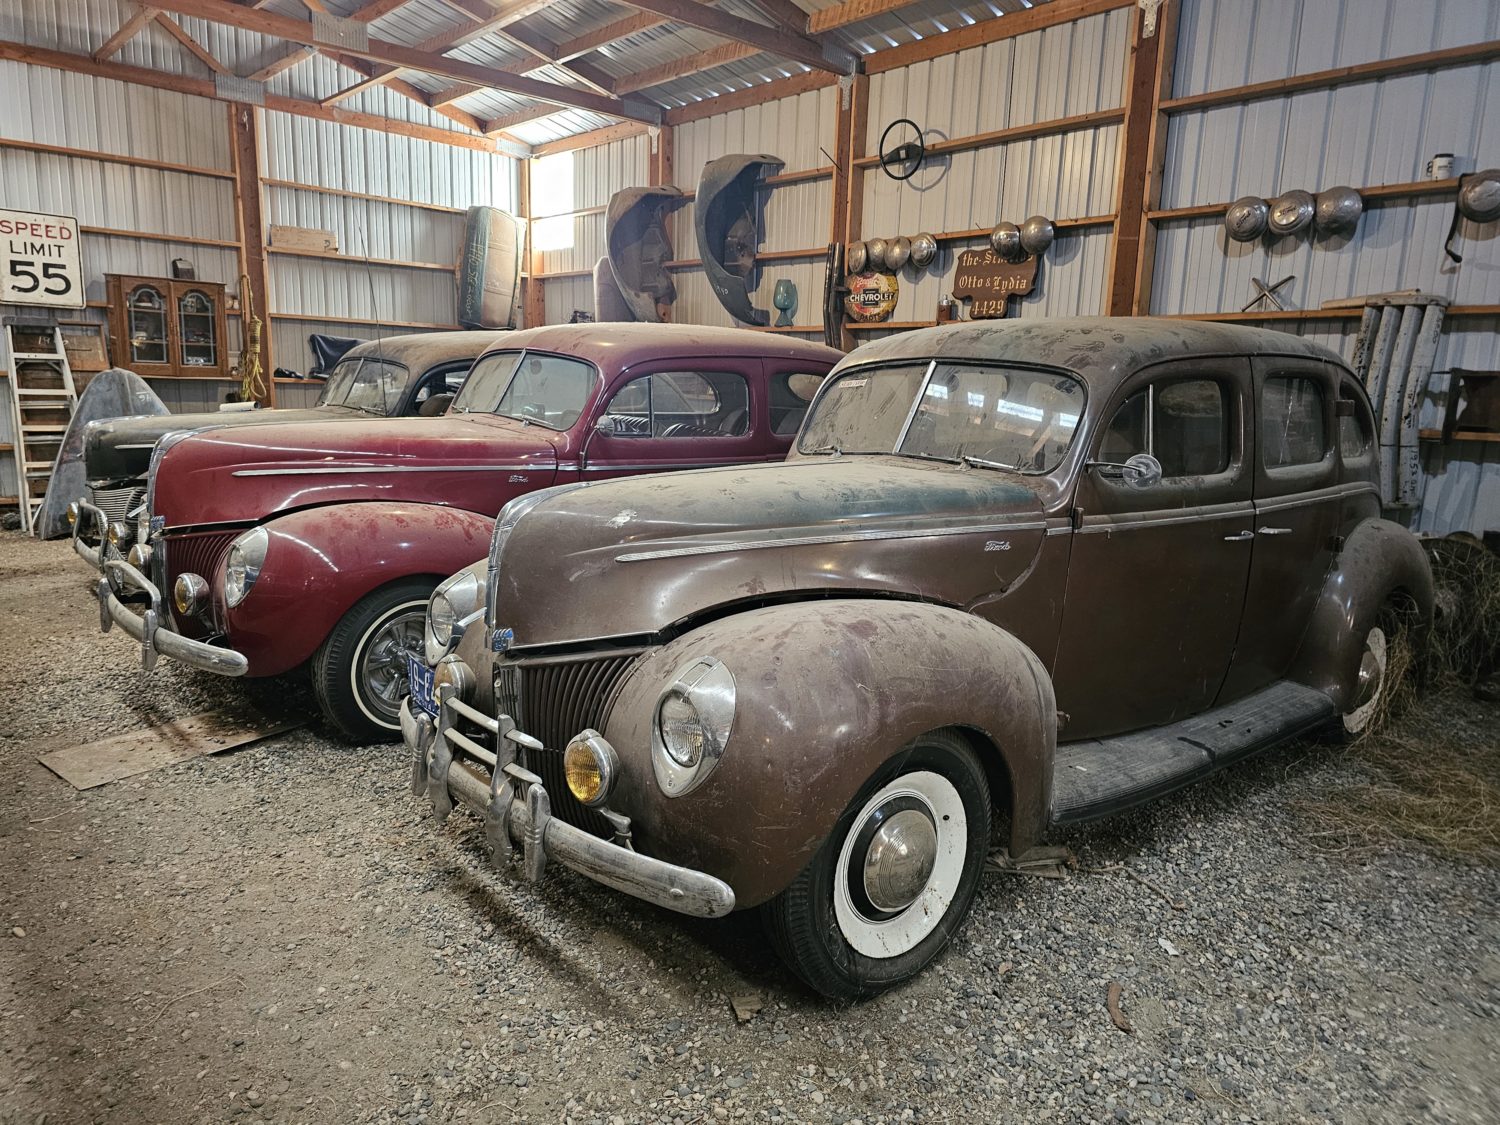 1940 Ford Cars, Parts & More! The Willie Shields Collection! Live Onsite-With Online Bidding - image 5